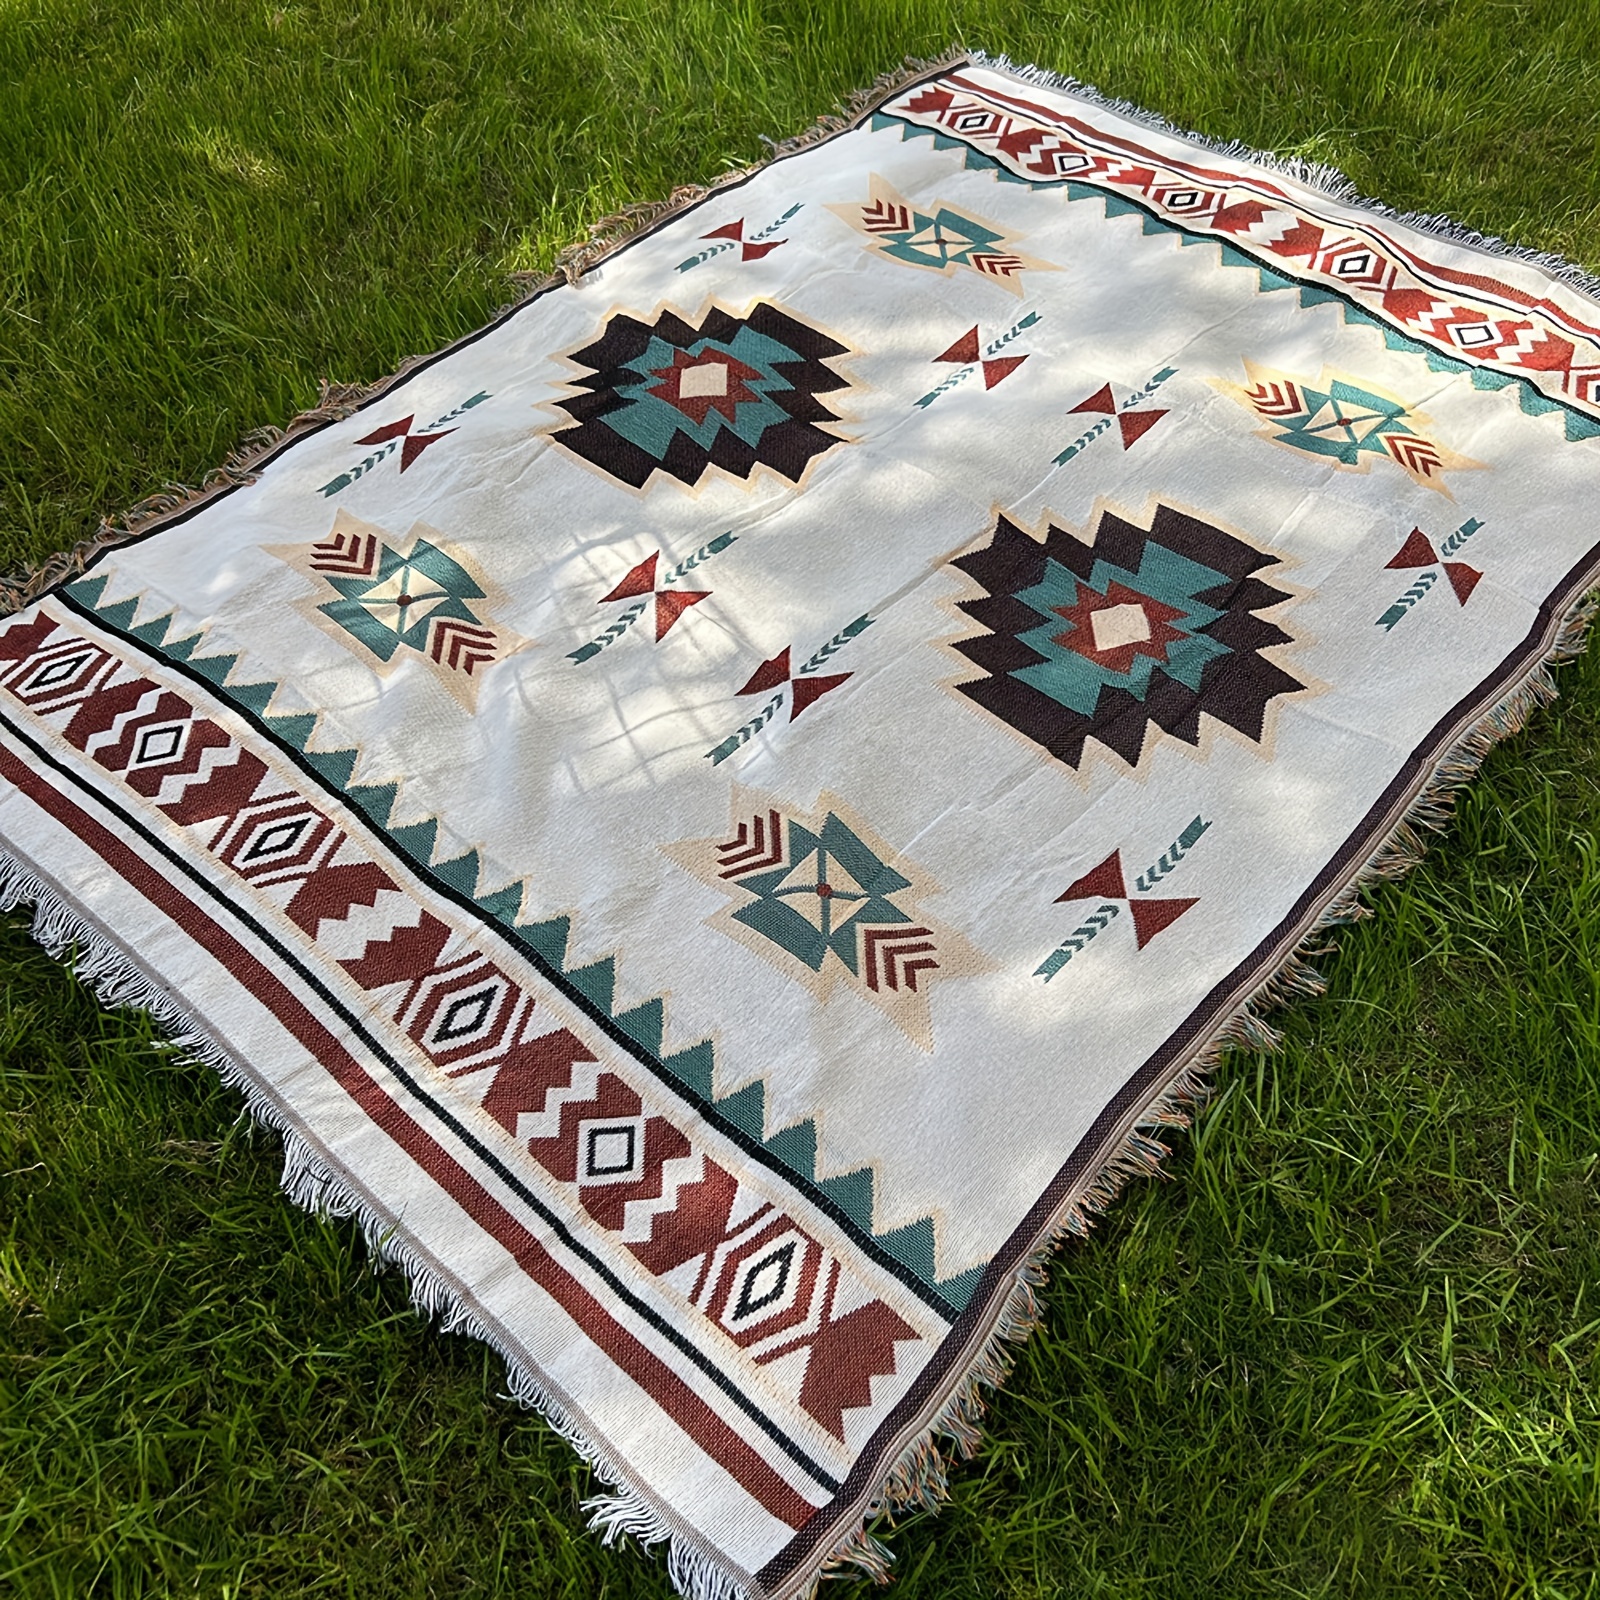 

Bohemian Carpet Picnic Mat, Outdoor Matcamping Supplies, Picnic Cloth & Sofa Blanket, Moisture-proof Matethnic Style Household Goods, Aztec Throw Blanket